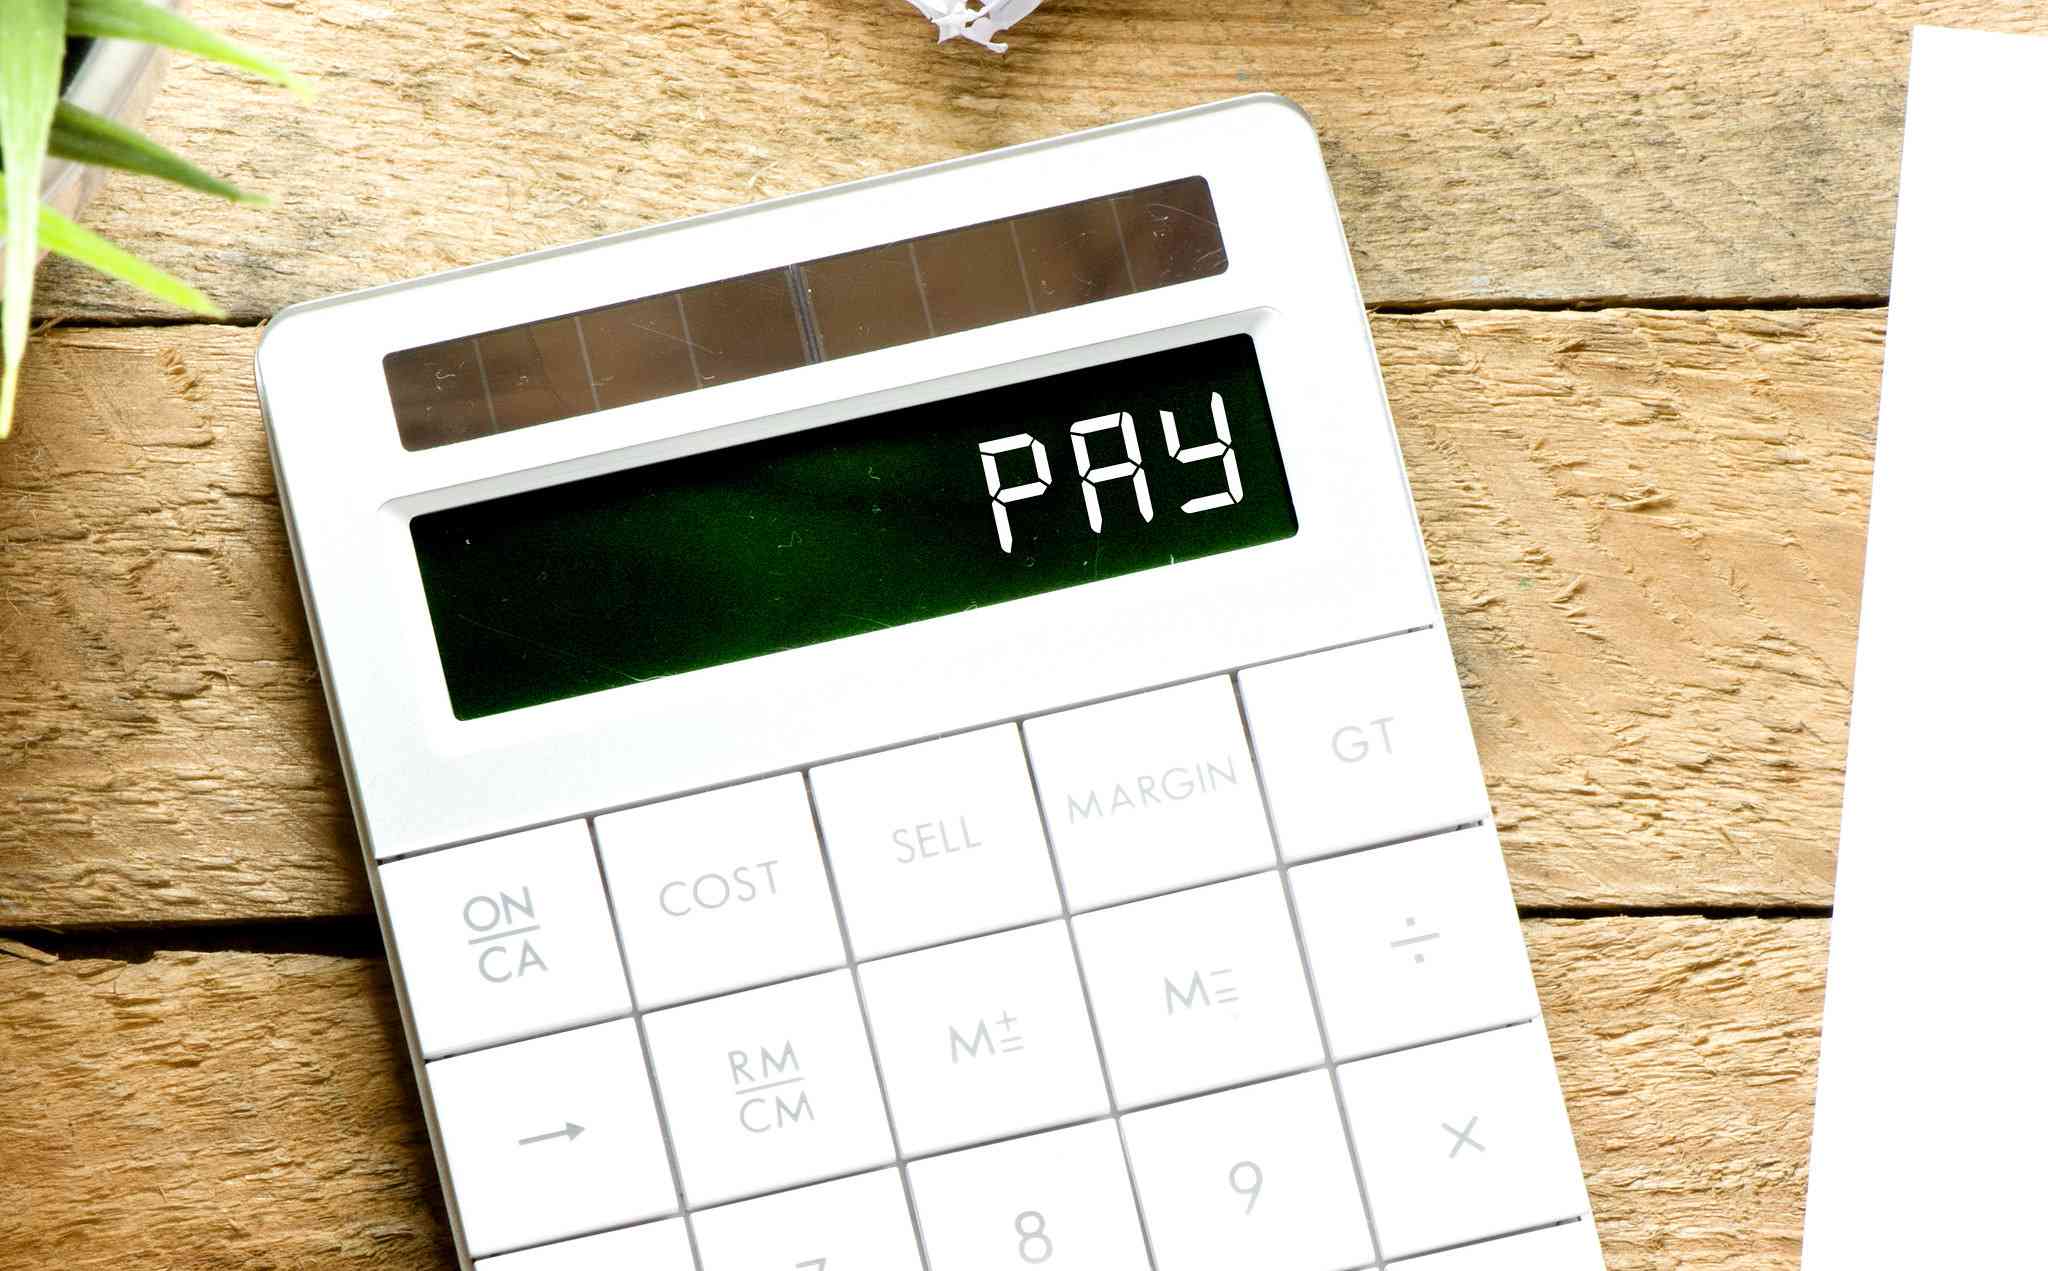 Introduction to Paycheck Expense Calculator from New York